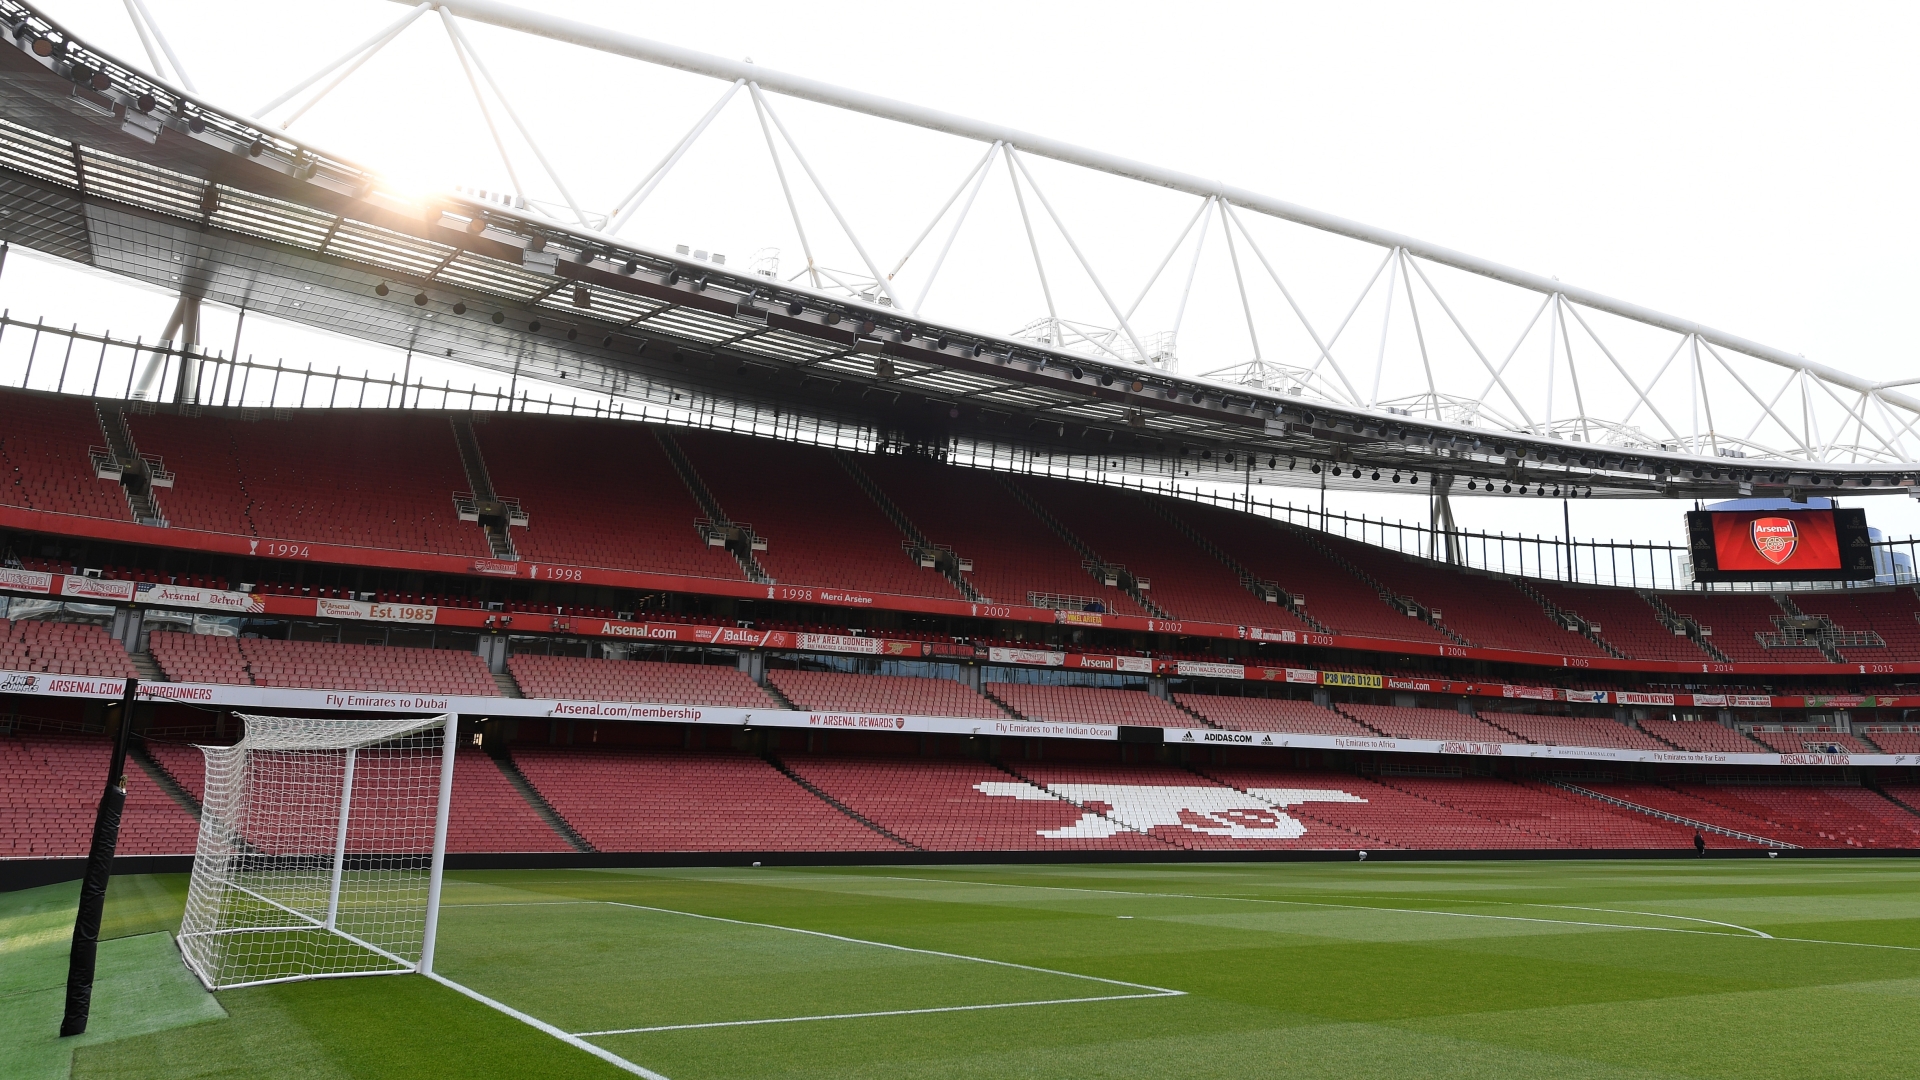 Arsenal send rare text message to fans hours before Man Utd clash with request